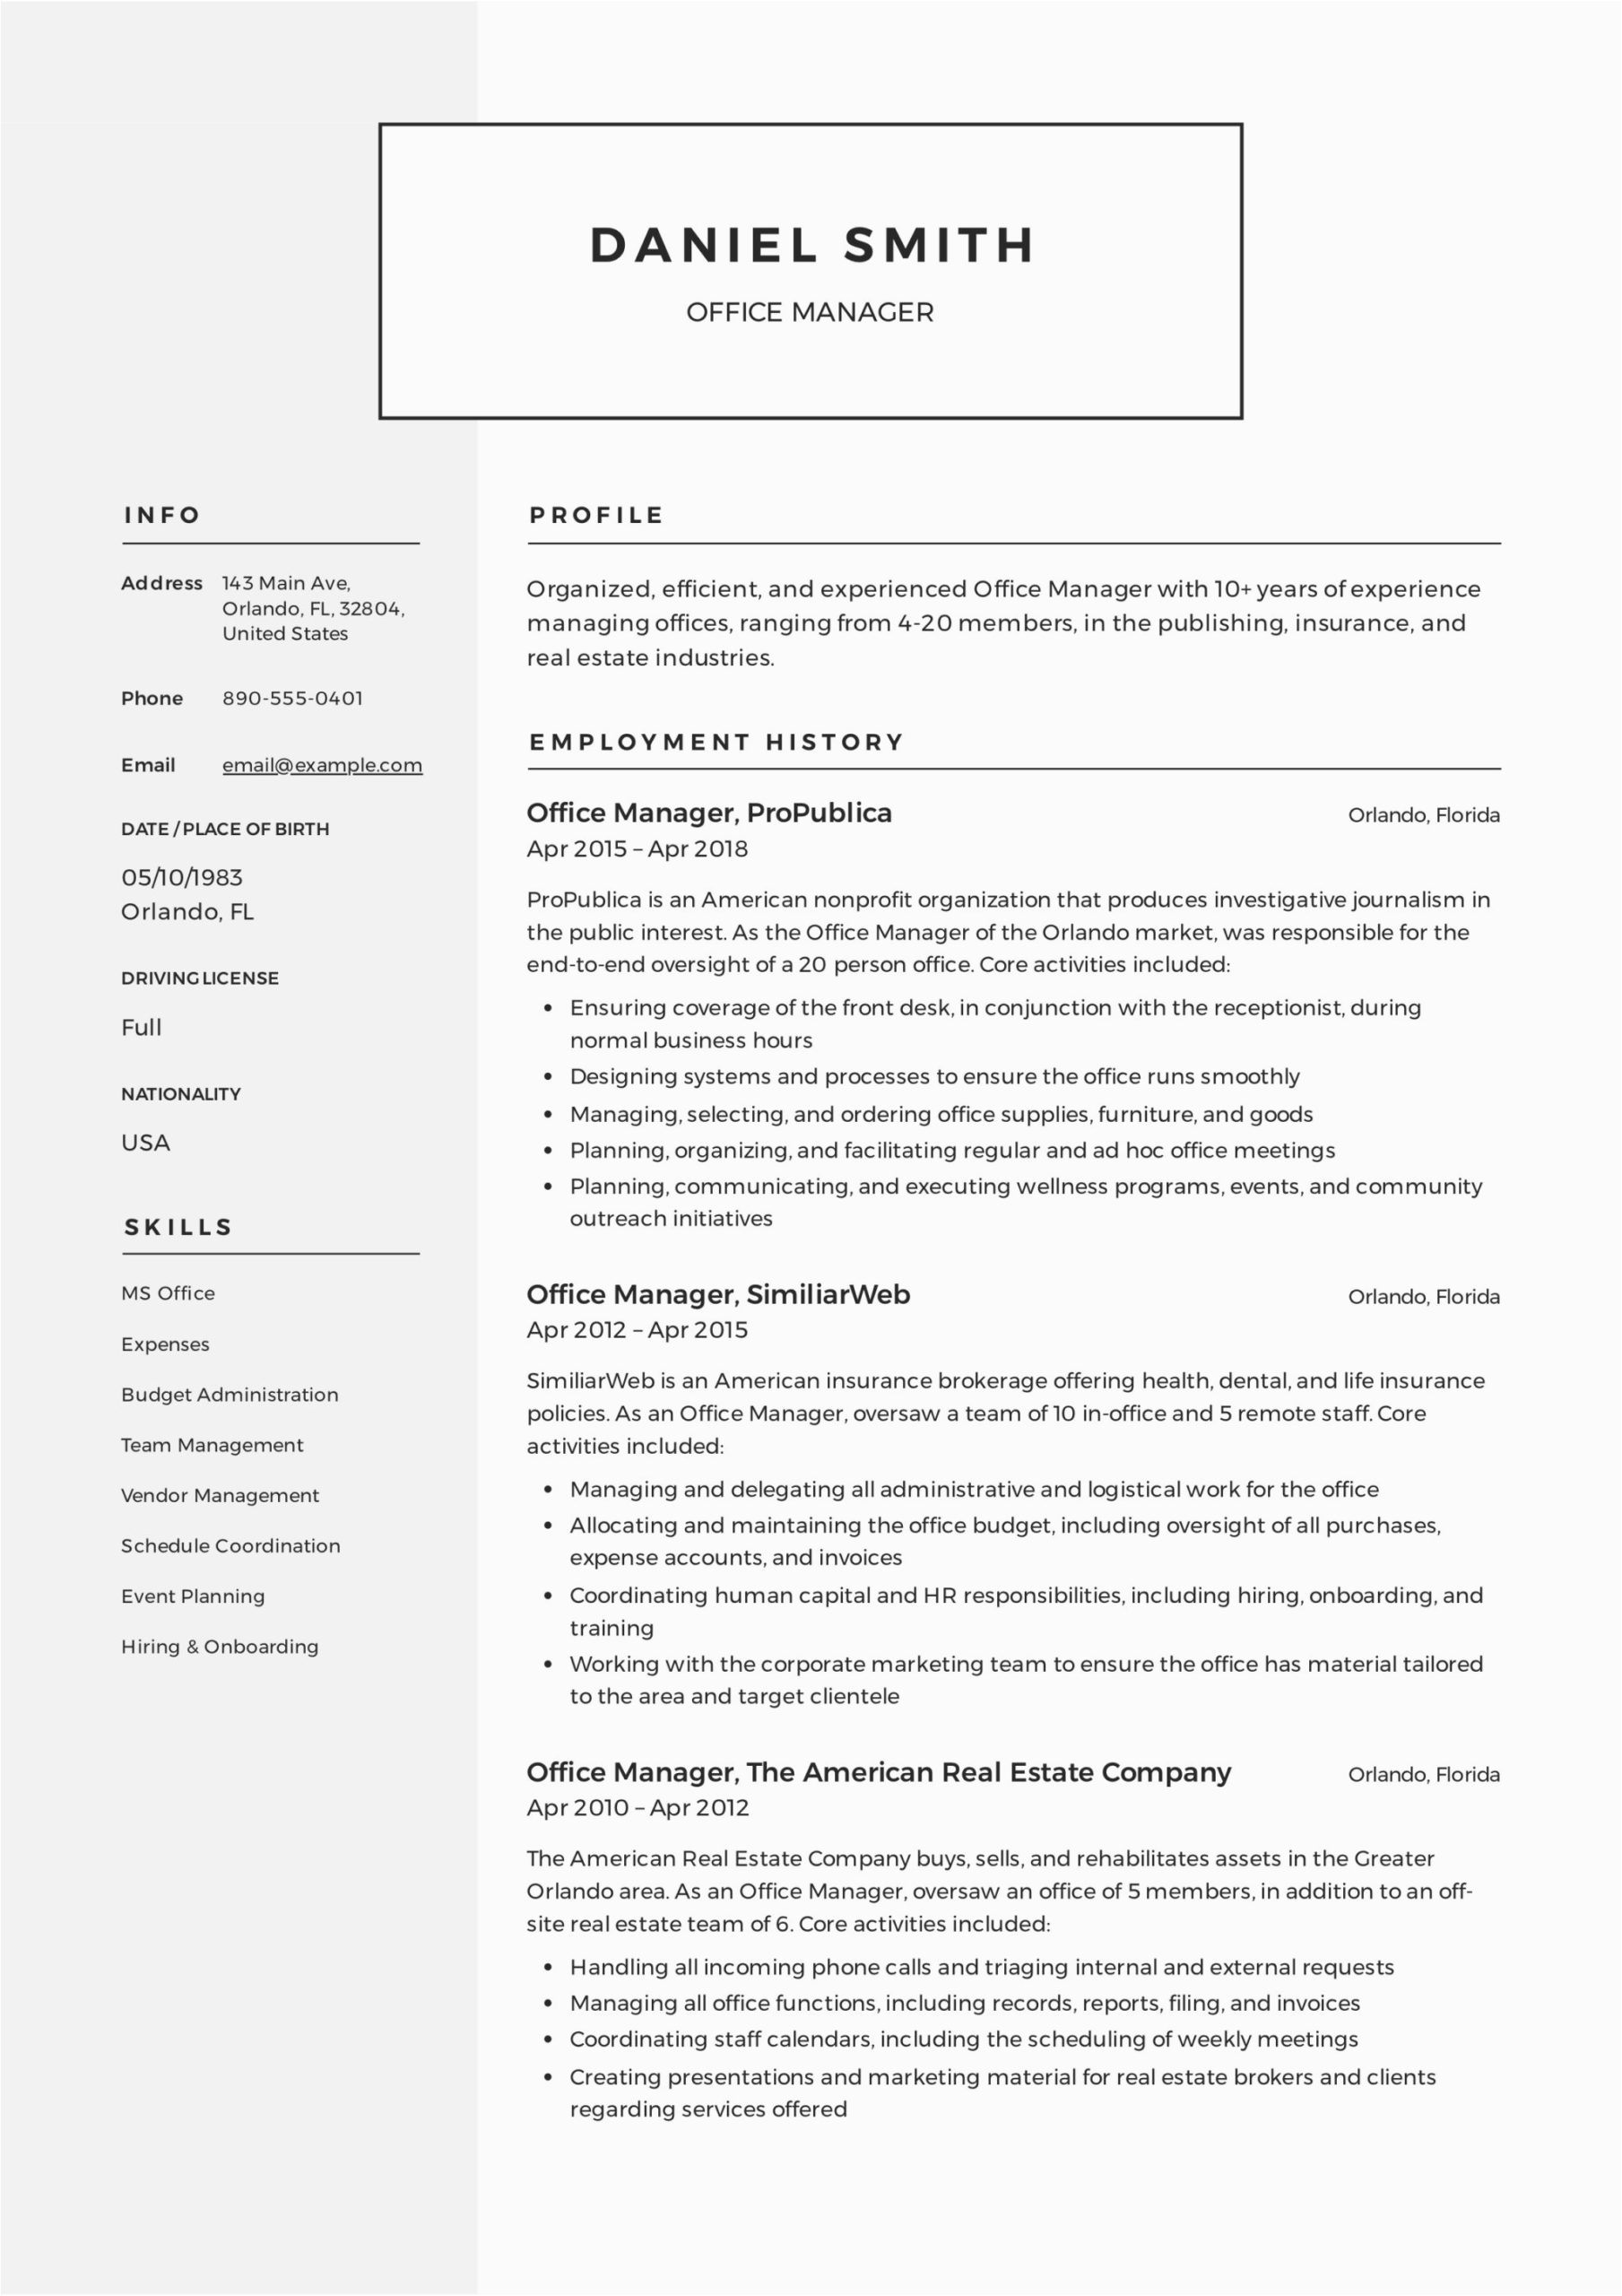 Office Manager Job Responsibilities Resume Sample Fice Manager Job Description Resume Sample Fice Manager Resume